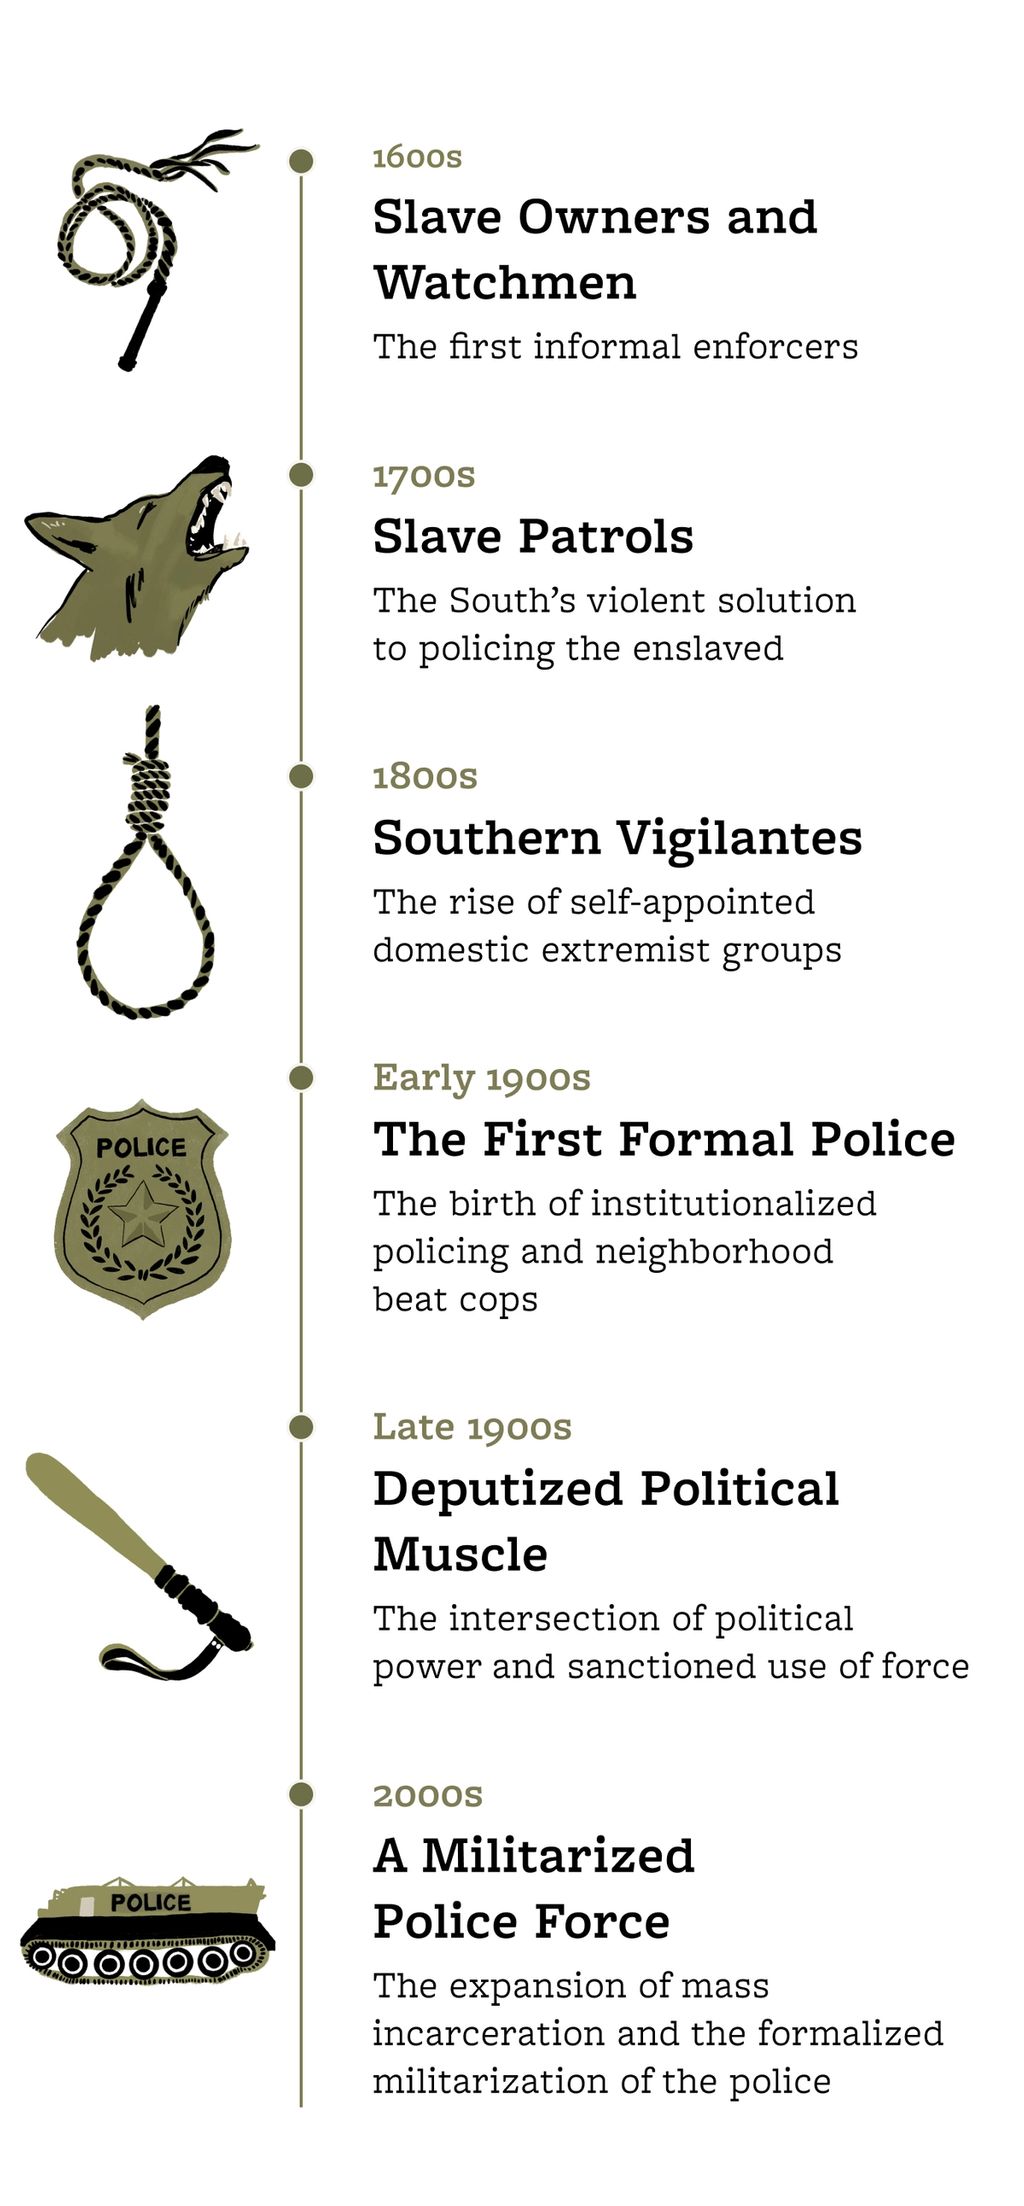 Infographic depicting the phases of policing from the 1600s to the early 2000s